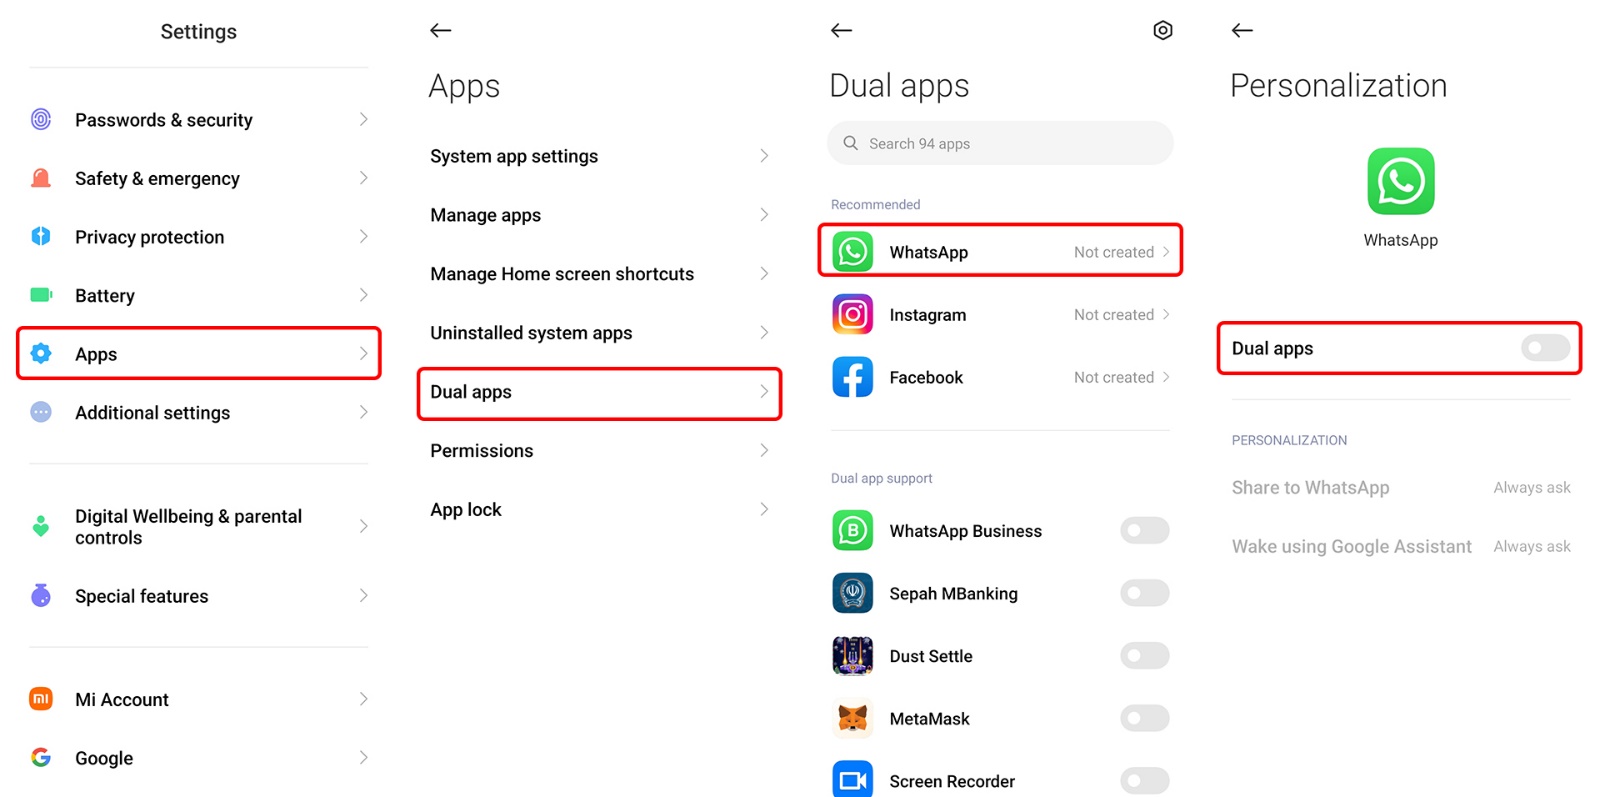 Install the second version of WhatsApp using Xiaomi Dual Apps